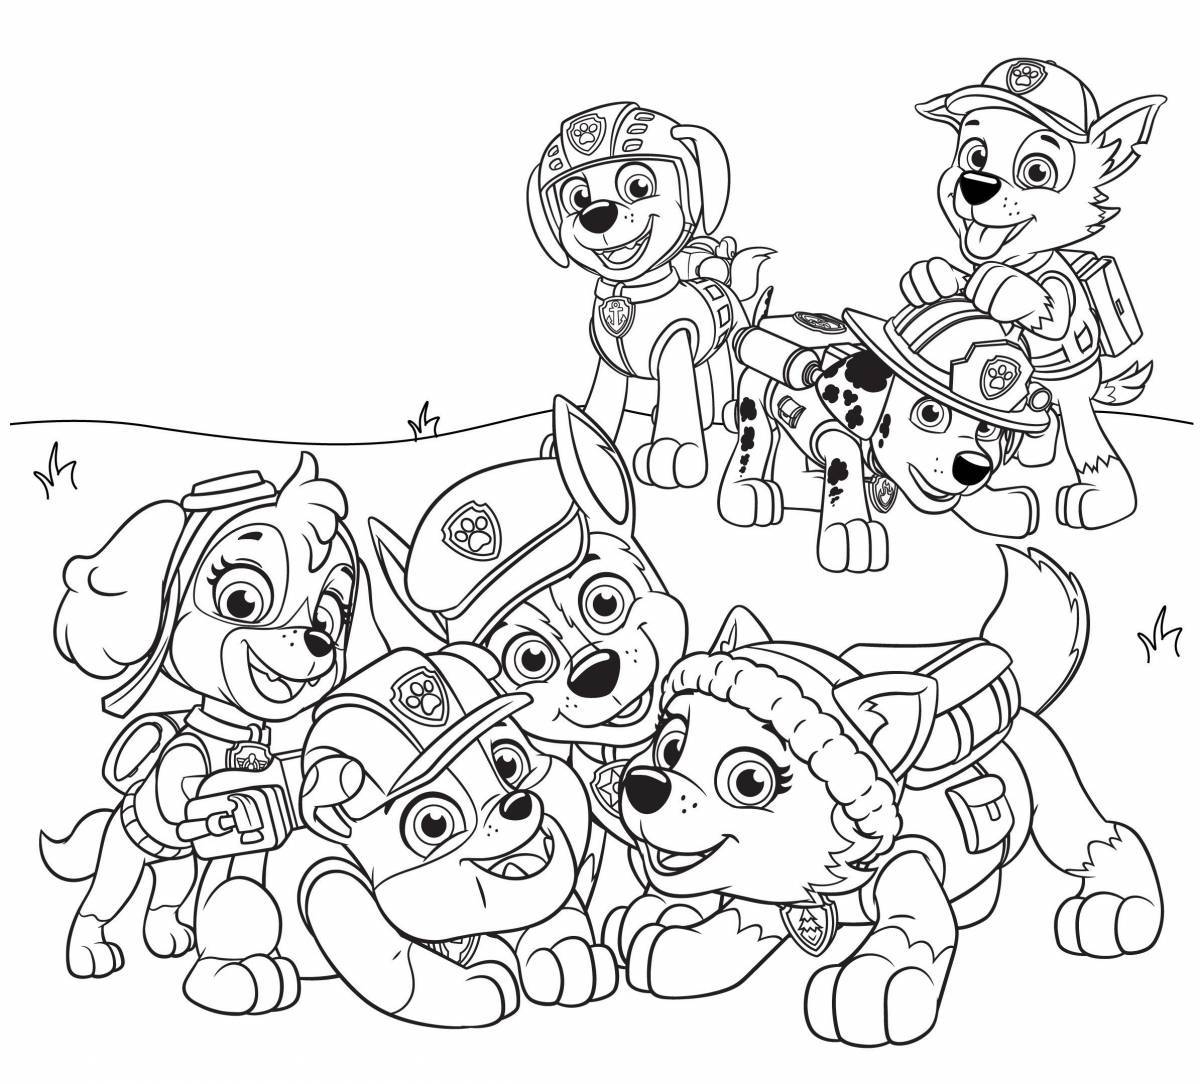 Outstanding Paw Patrol Coloring Page for Little Ones